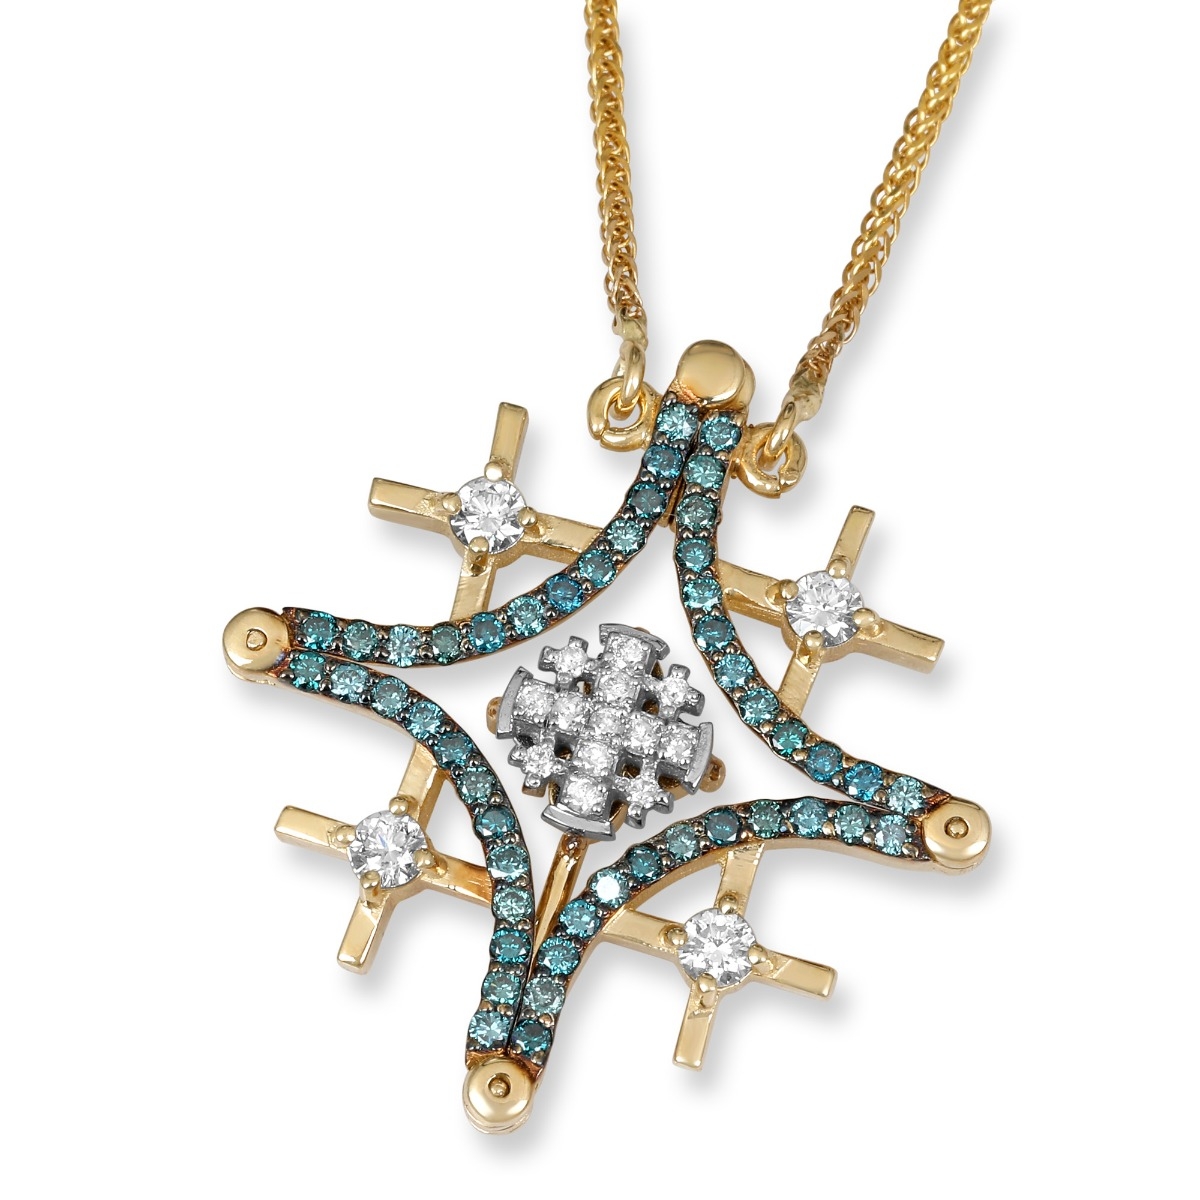 Anbinder Deluxe 14K Yellow and White Gold Magnetic Jerusalem Cross Necklace with White and Blue Diamonds - 1